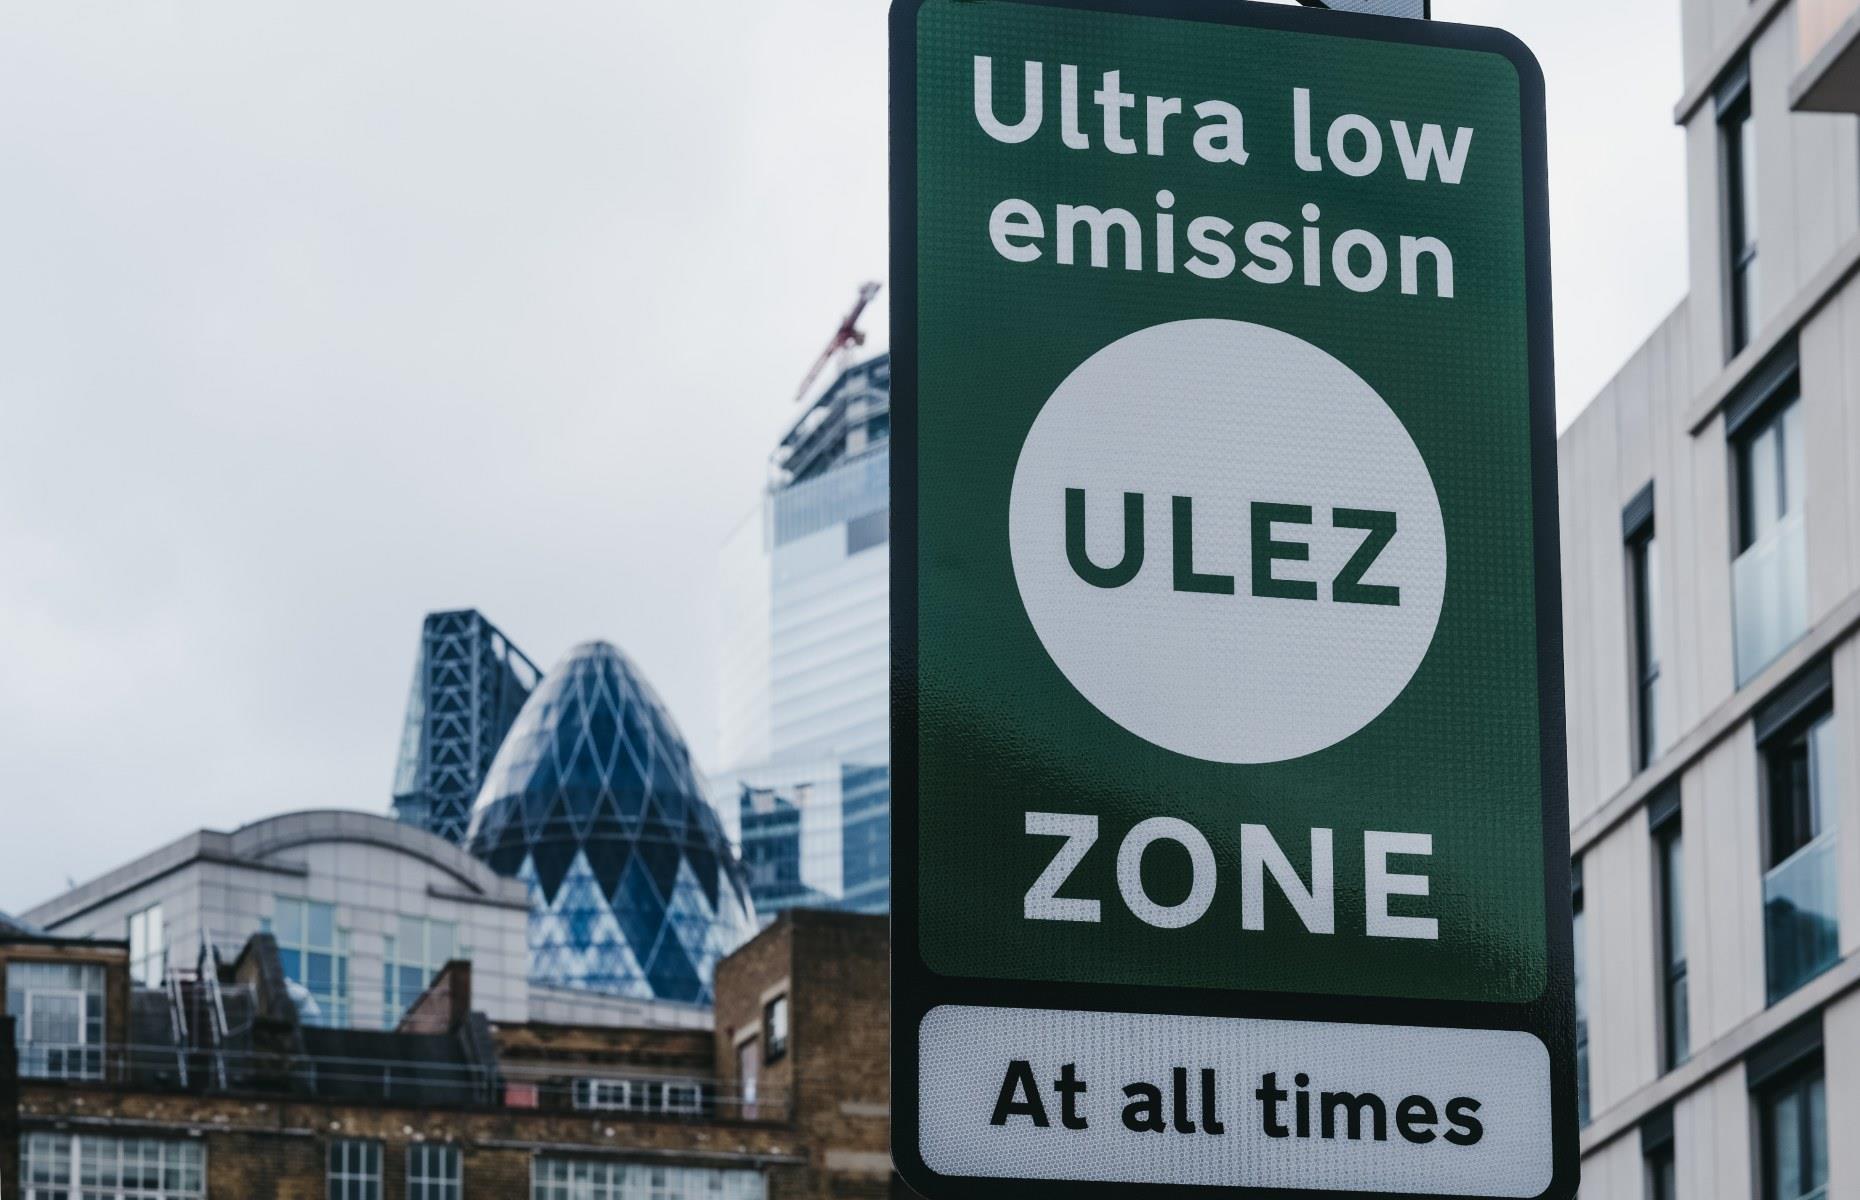 <p>In a bid to reduce the continent’s carbon footprint, more and more low emissions zones are cropping up all over Europe and placing restrictions on petrol and diesel vehicles passing through major cities such as London, Paris and Madrid. Not only does driving a car in these zones result in huge charges to compensate for the environmental impact of the journey, but it can also mean you’re stuck in traffic jams that eat into the enjoyment of your trip. While hiring a car is required to visit more rural, remote and coastal areas, you shouldn’t need one to get around cities.</p>